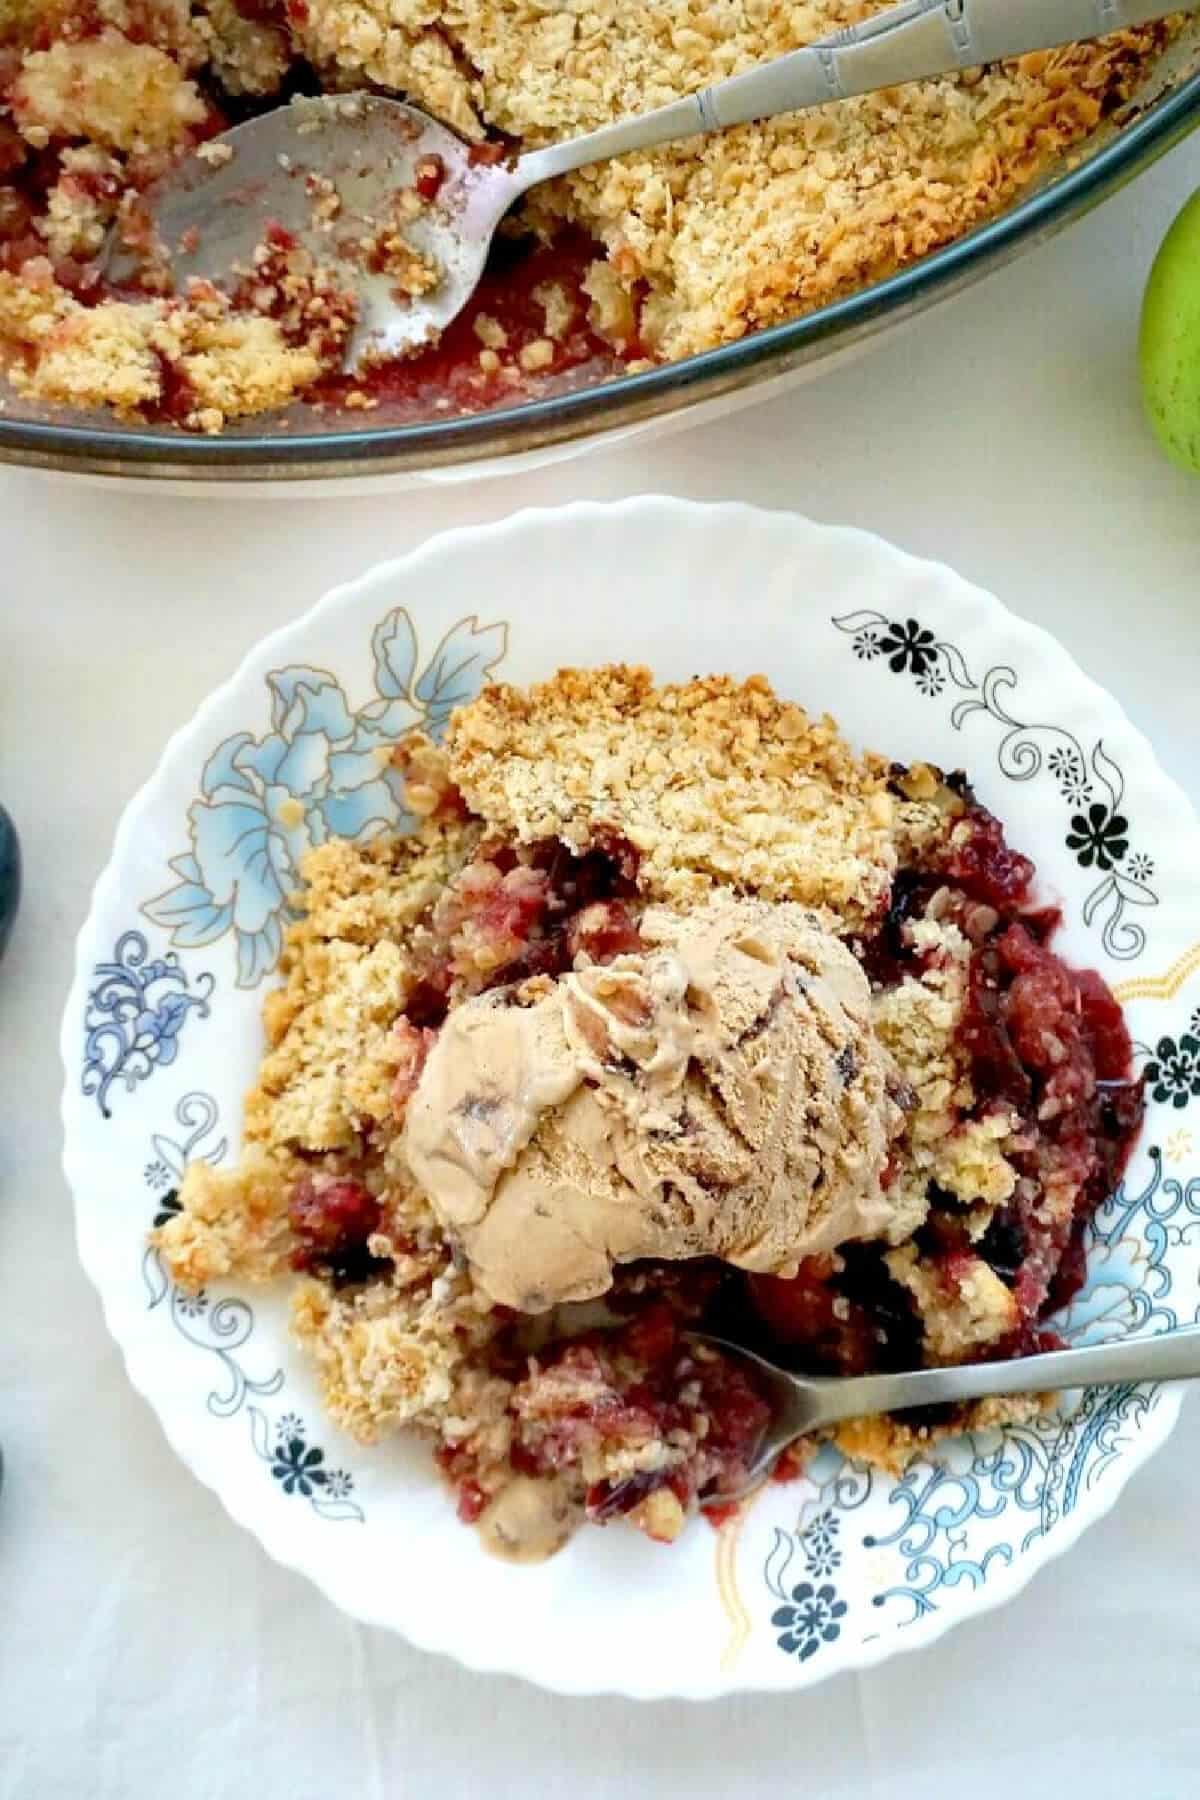 Overhead shoot of a plate with apple and plum crumble.